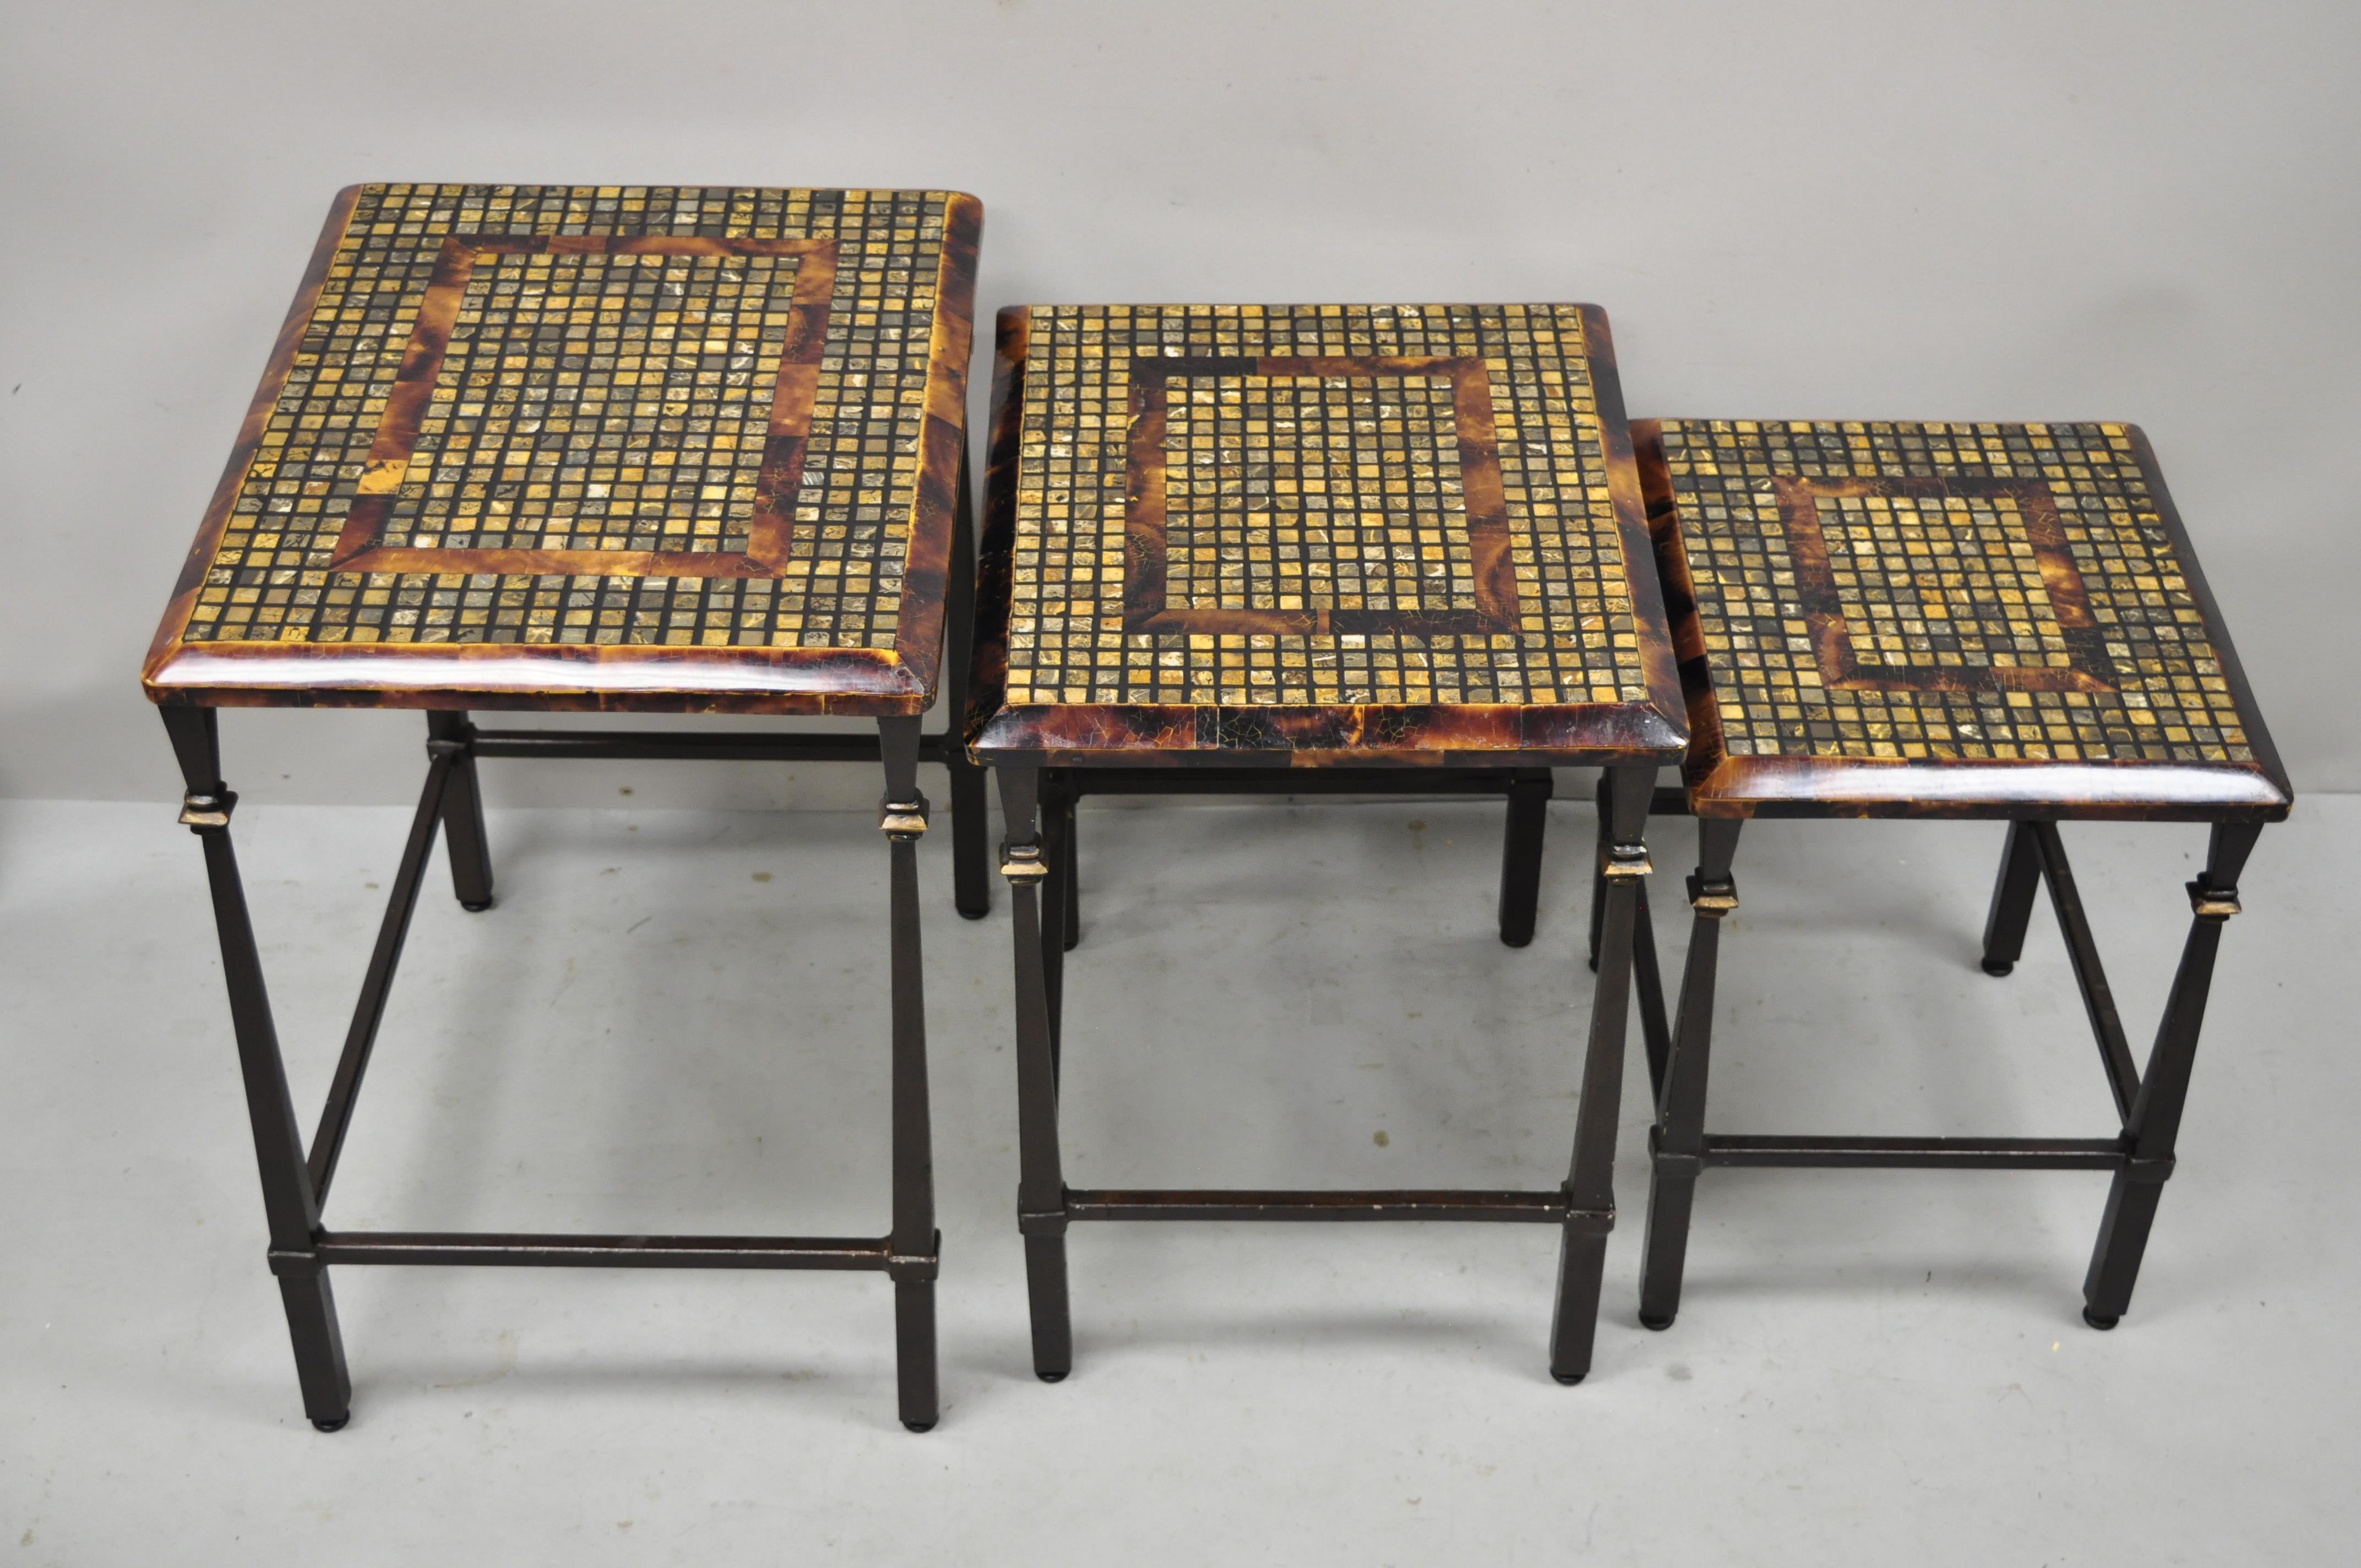 Philippine Faux Tortoise Shell Mosaic Stone Inlay Mediterranean Hooker Nesting Side Tables 